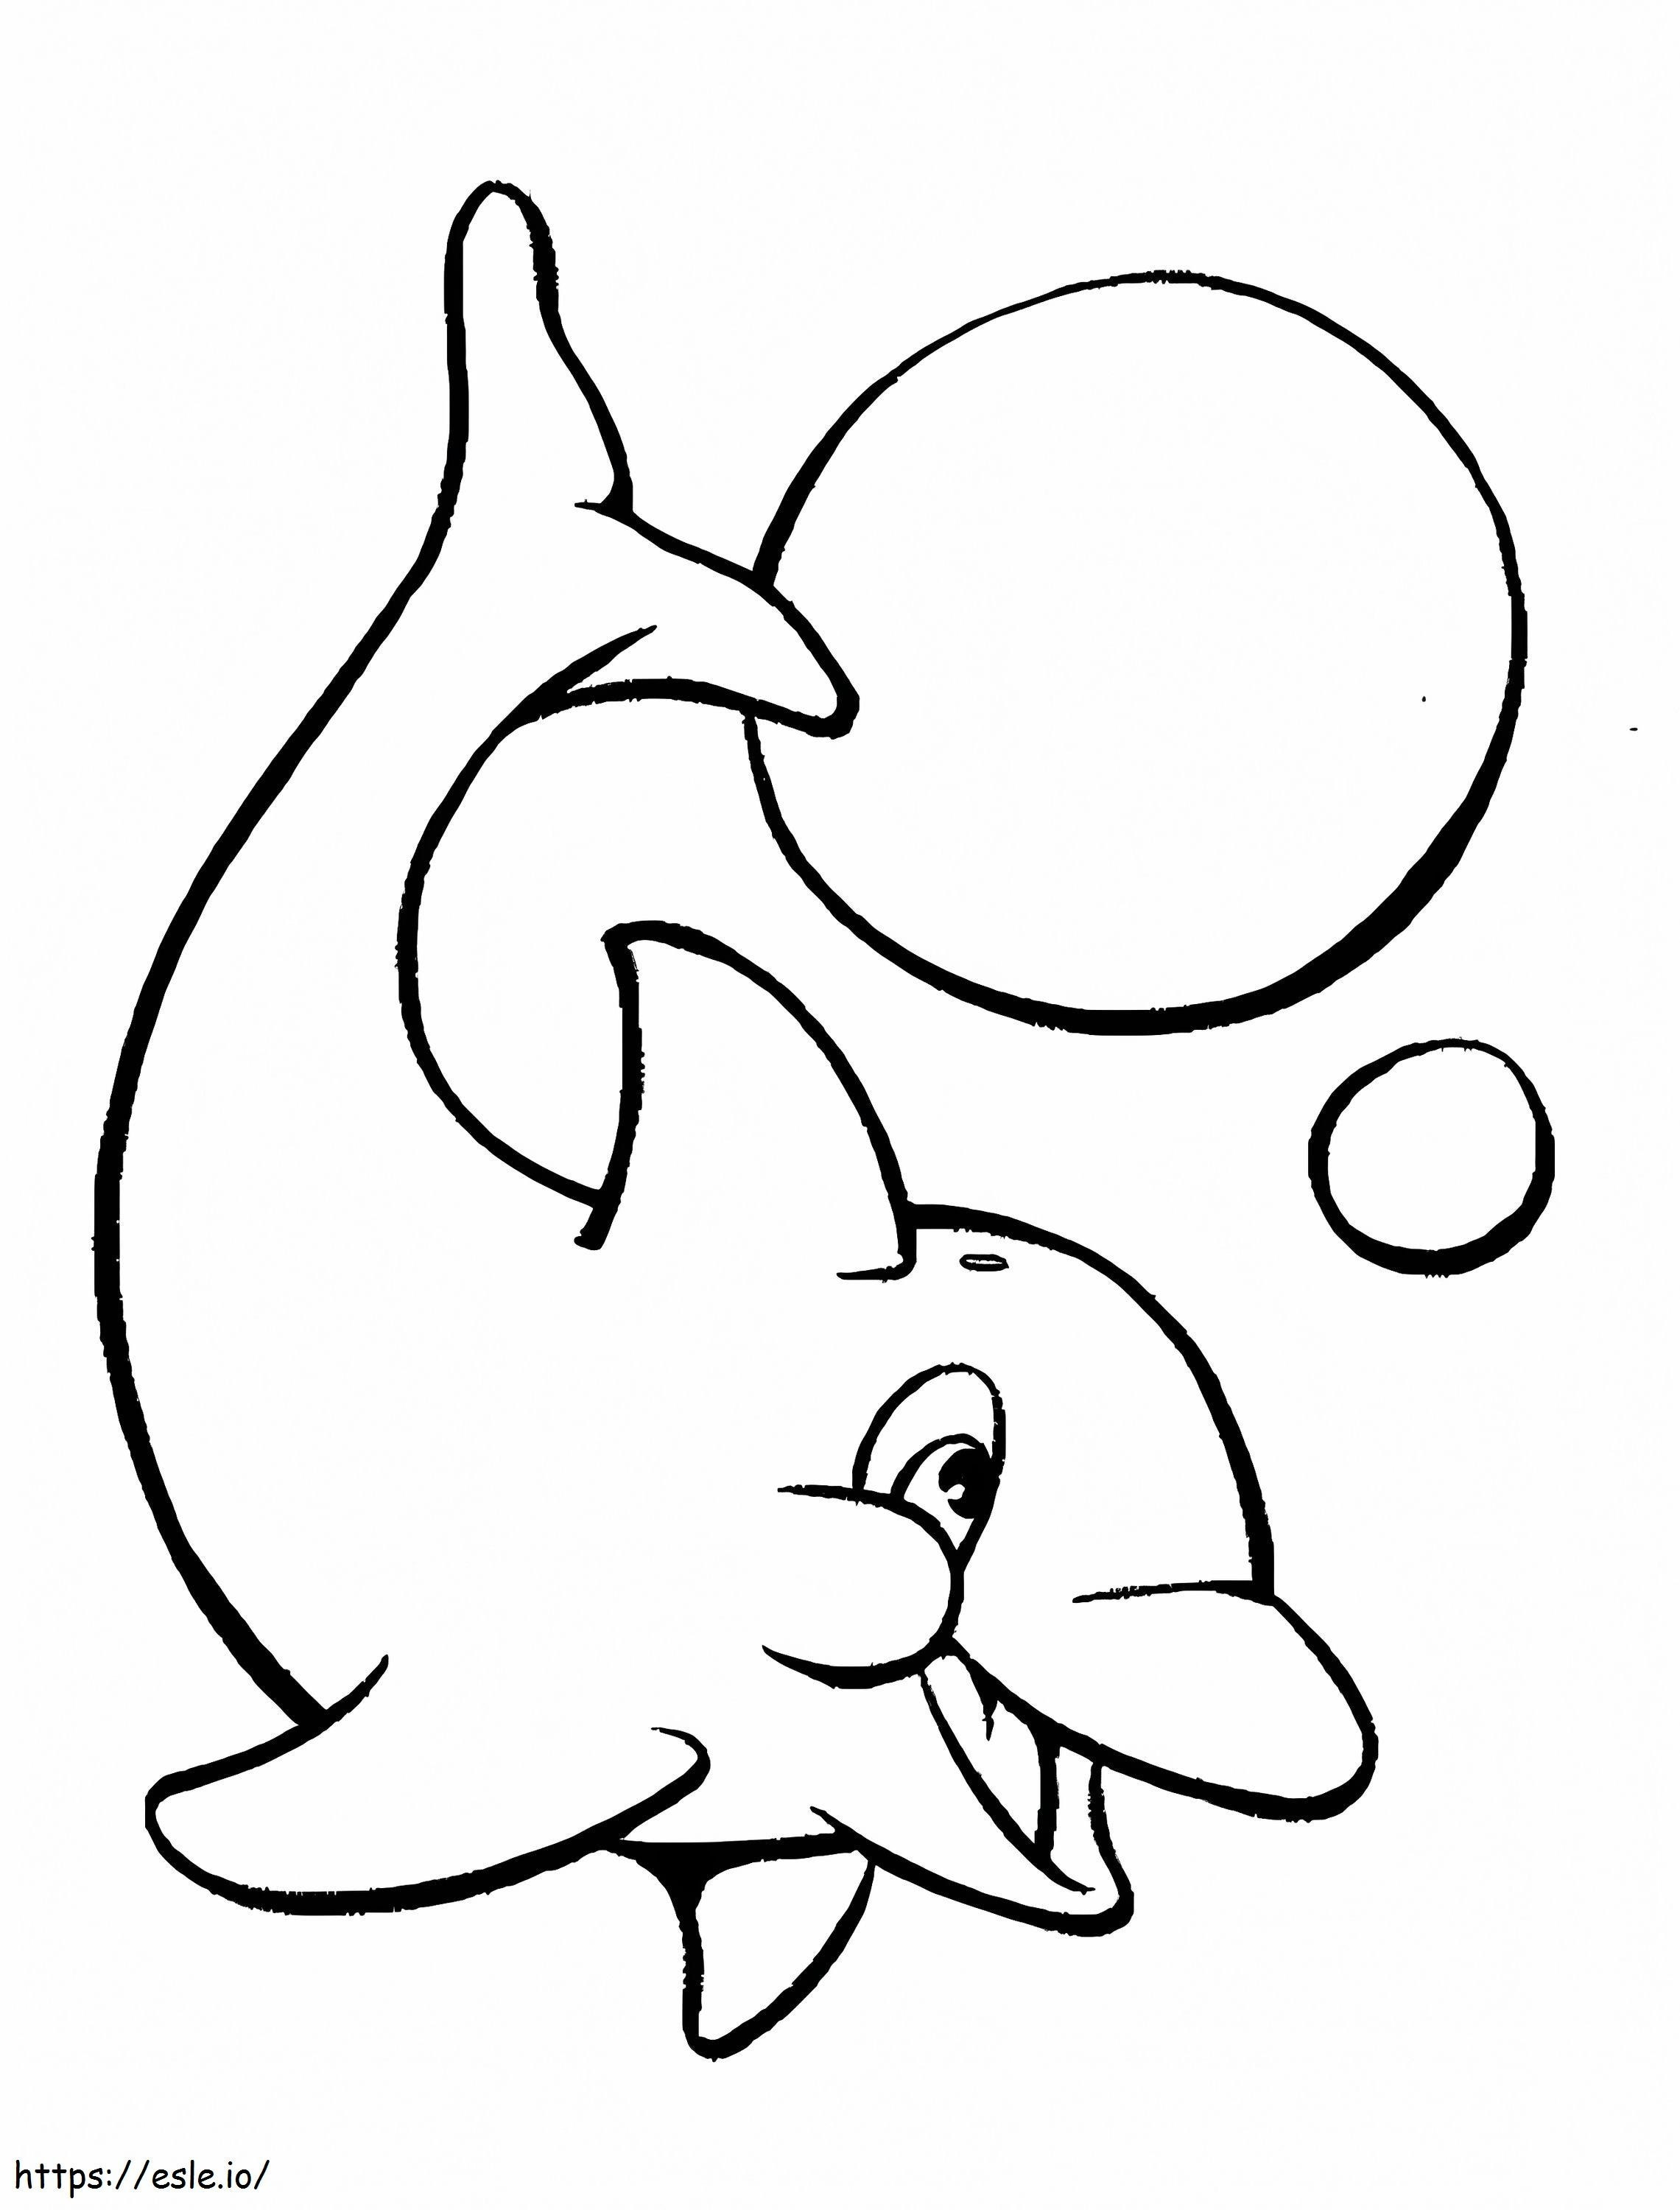 Dolphin With A Balloon coloring page